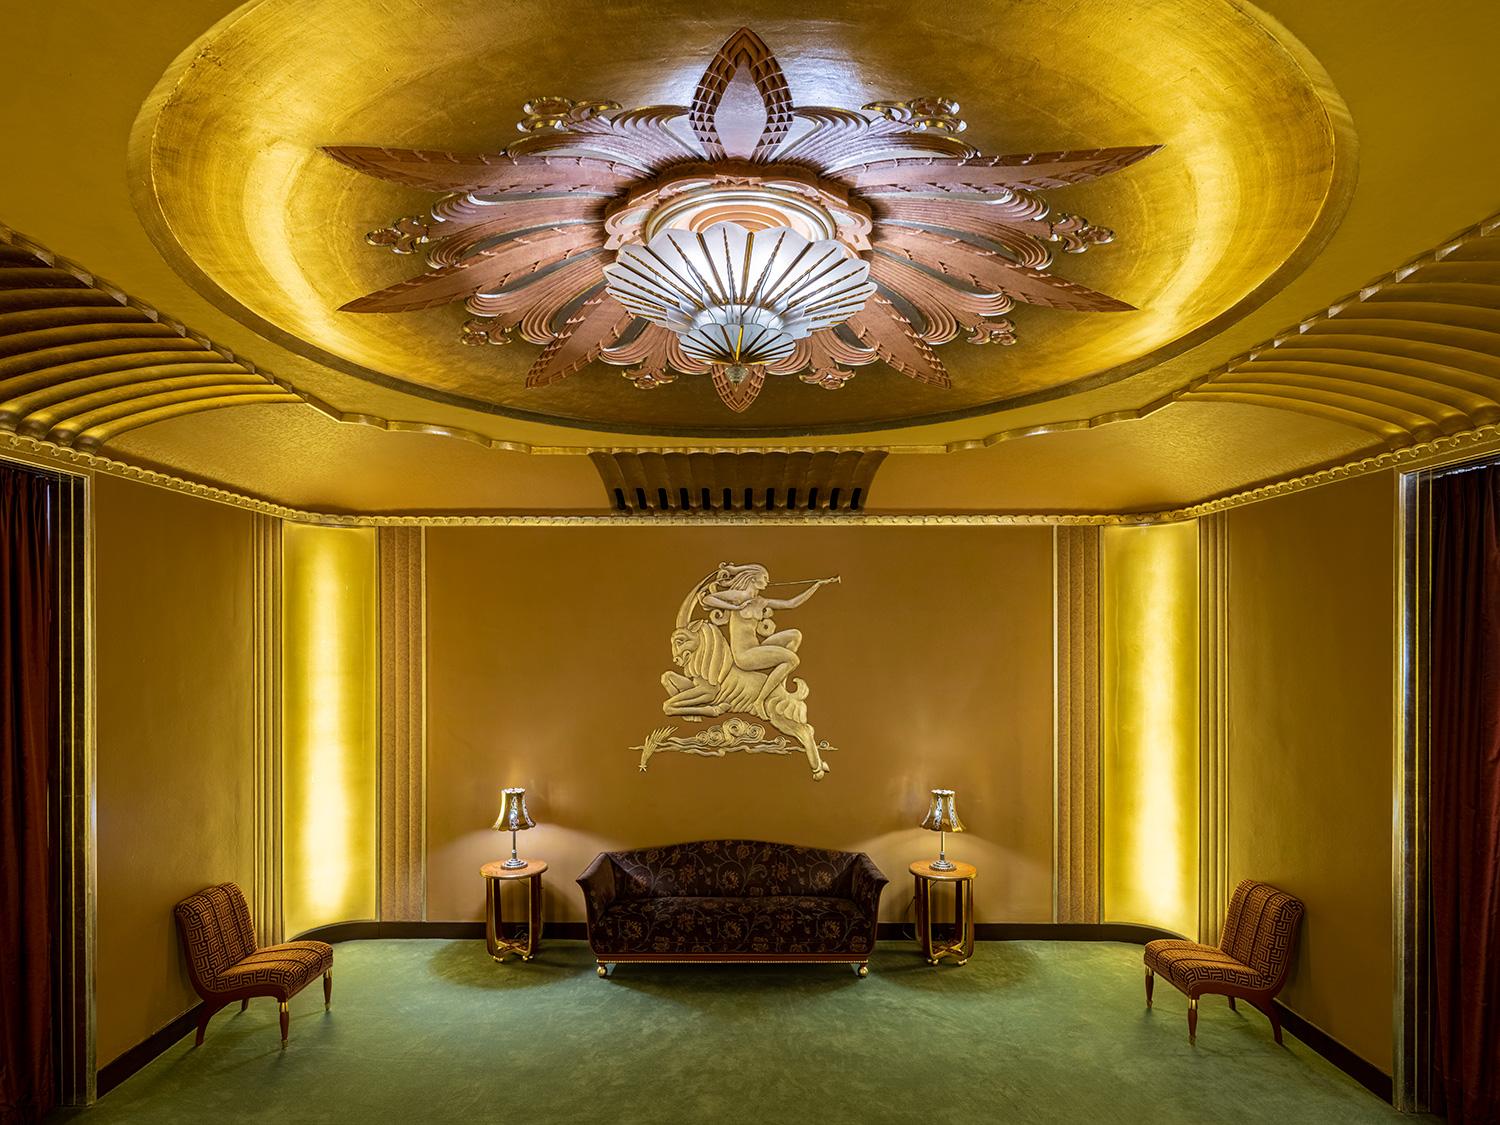 The ladies lounge of the Paramount Theatre in Oakland was designed by consummate San Francisco-based architect Timothy L. Pfleuger. An exquisite space seemingly out of the past and future simultaneously. Futurist machine-age elements of energy and